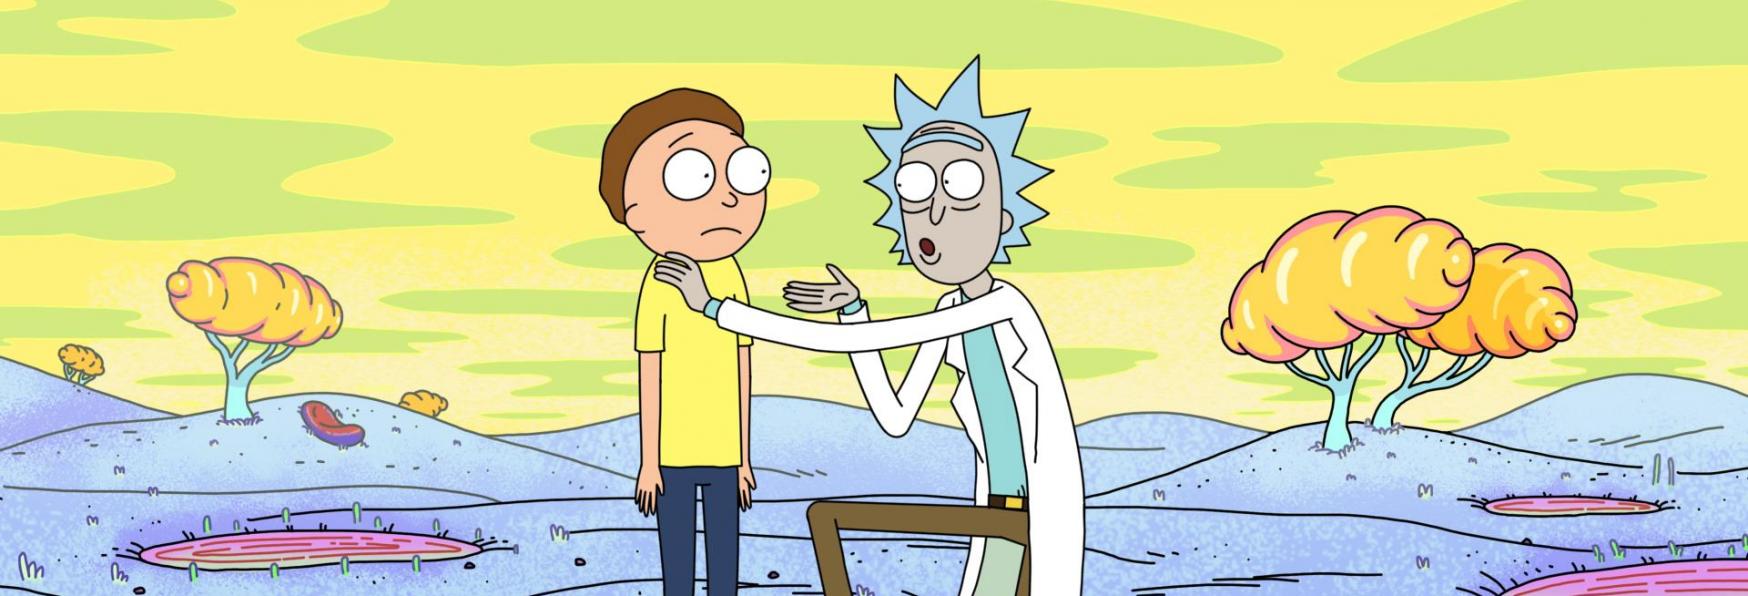 Rick and Morty: Good News for the Animated Series Despite the Controversy on Roiland